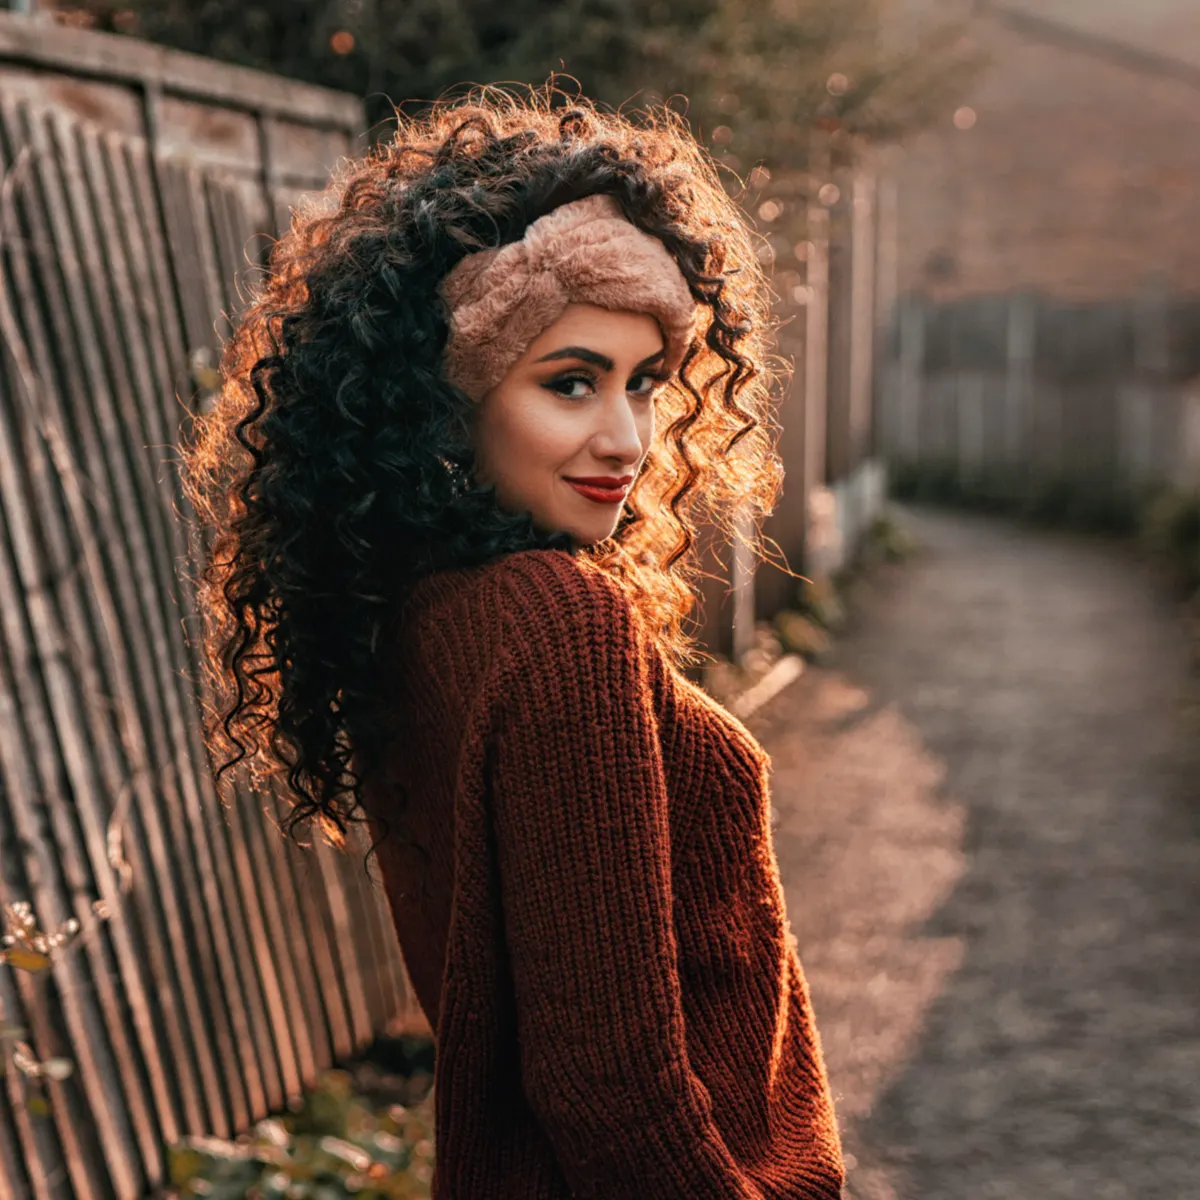 Woman with attractive curly hair. Find out how to enhance curly hair.